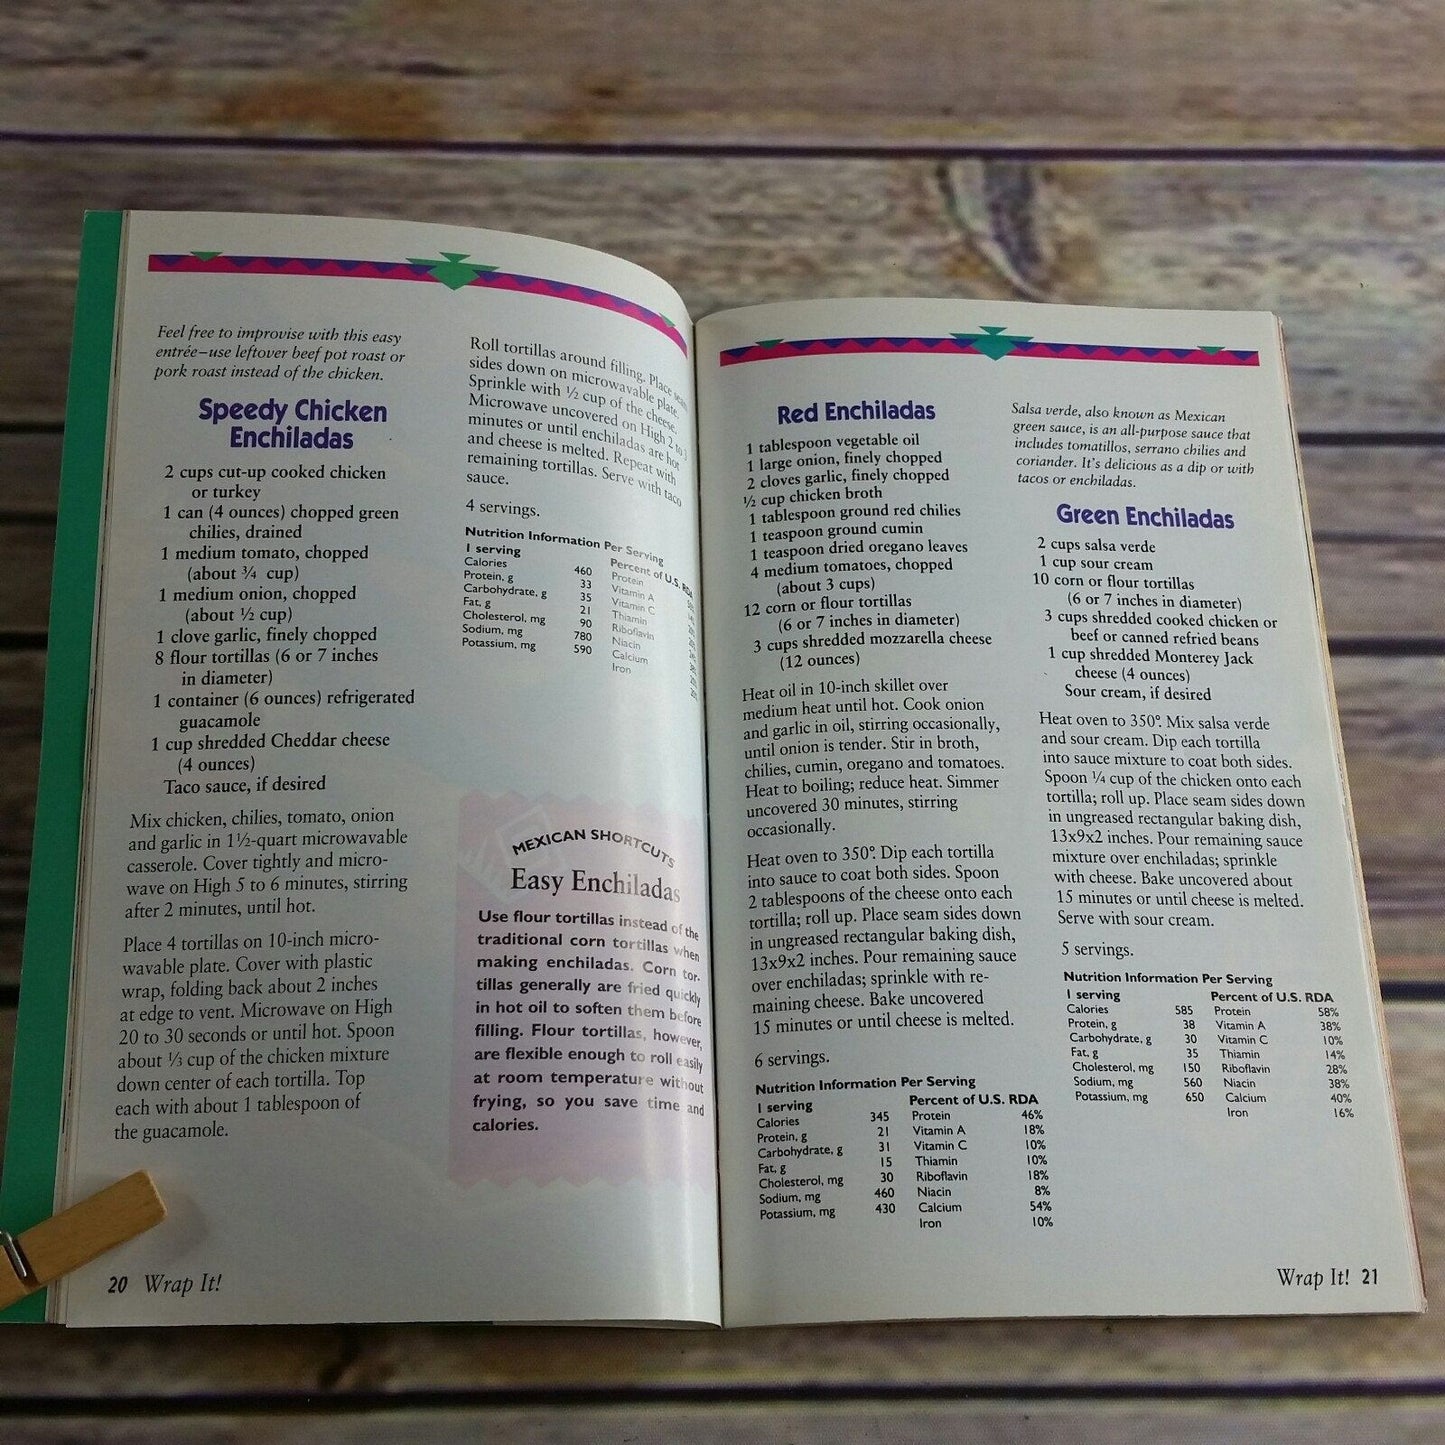 Vintage Cookbook Betty Crocker Mexican Fast and Flavorful 1994 Recipes Paperback Booklet Grocery Store Pamphlet